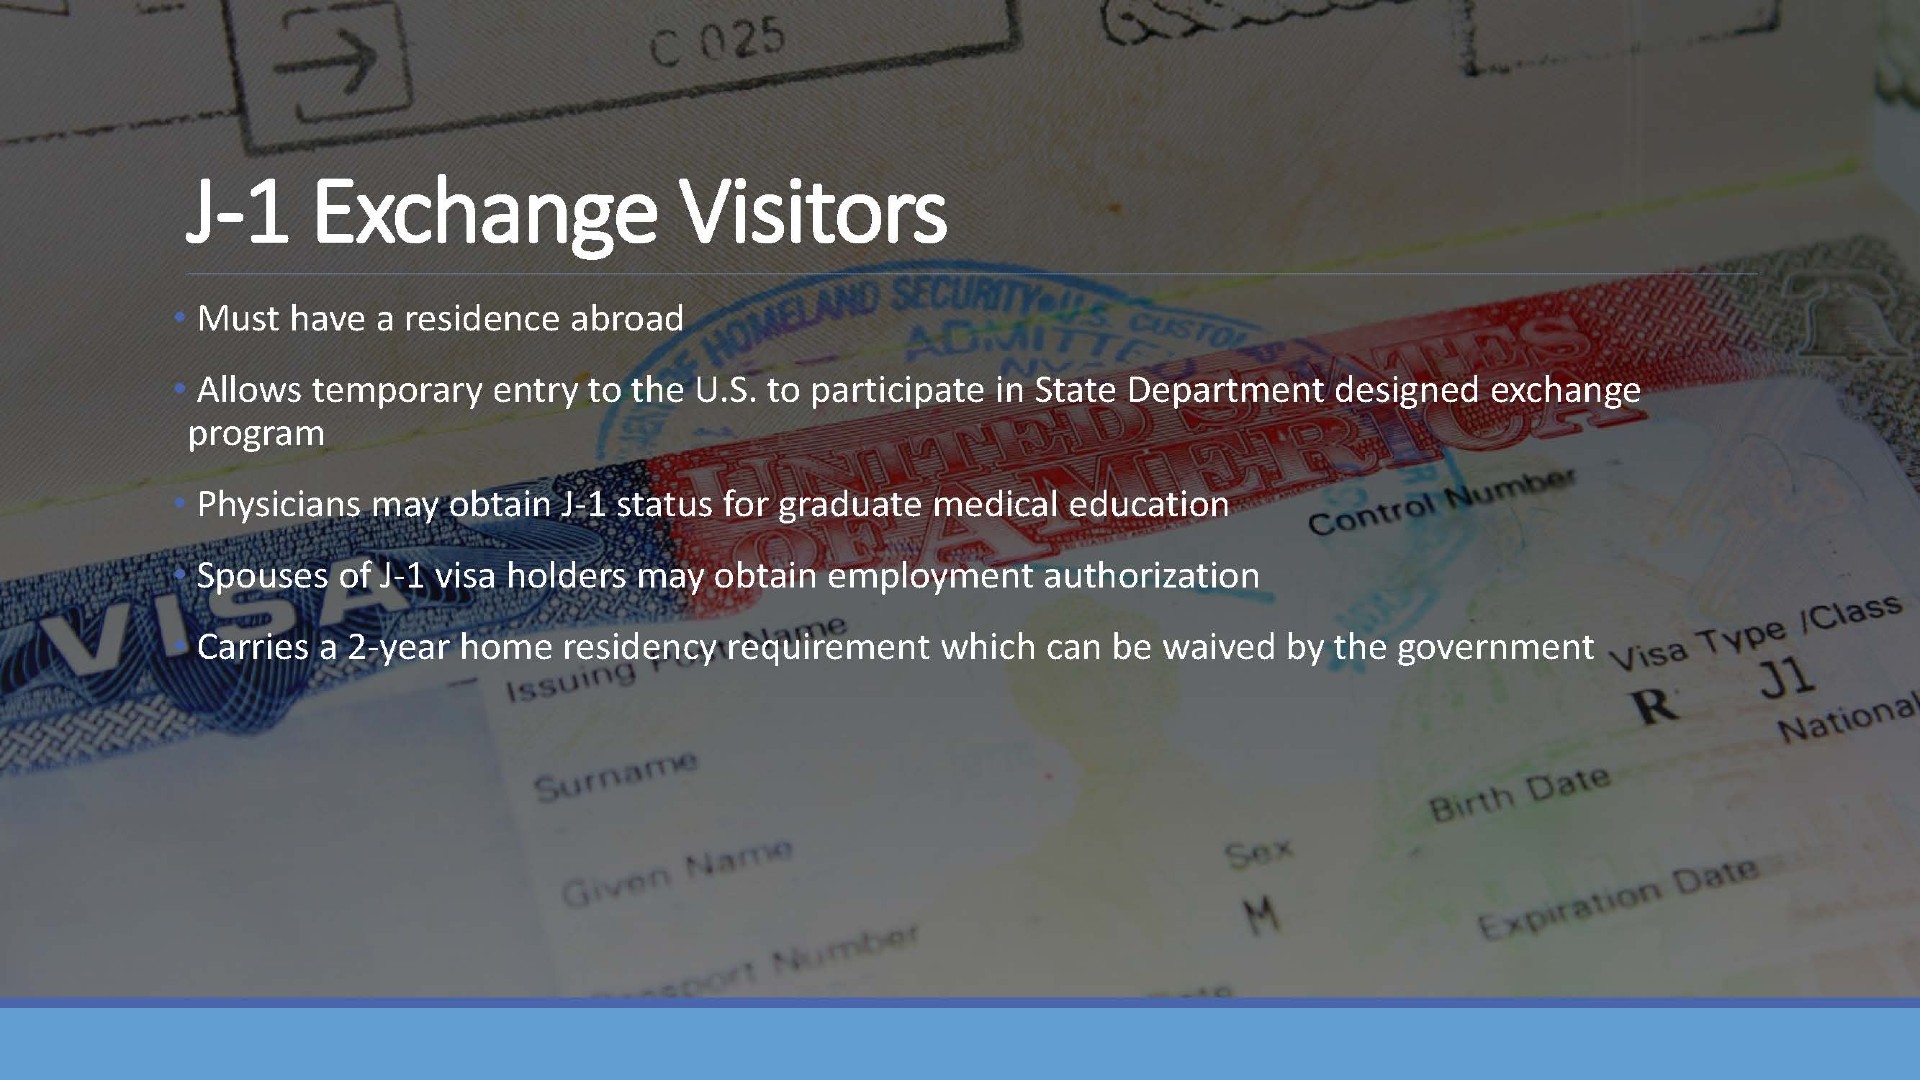 J-1 Exchange Visitors. Must have a residence abroad. Allows temporary entry to the U.S. to participate in State Department designed exchange program. Physicians may obtain J-1 status for graduate medical education. Spouses of J-1 visa holders may obtain employment authorization. Carries a 2-year home residency requirement which can be waived by the government.